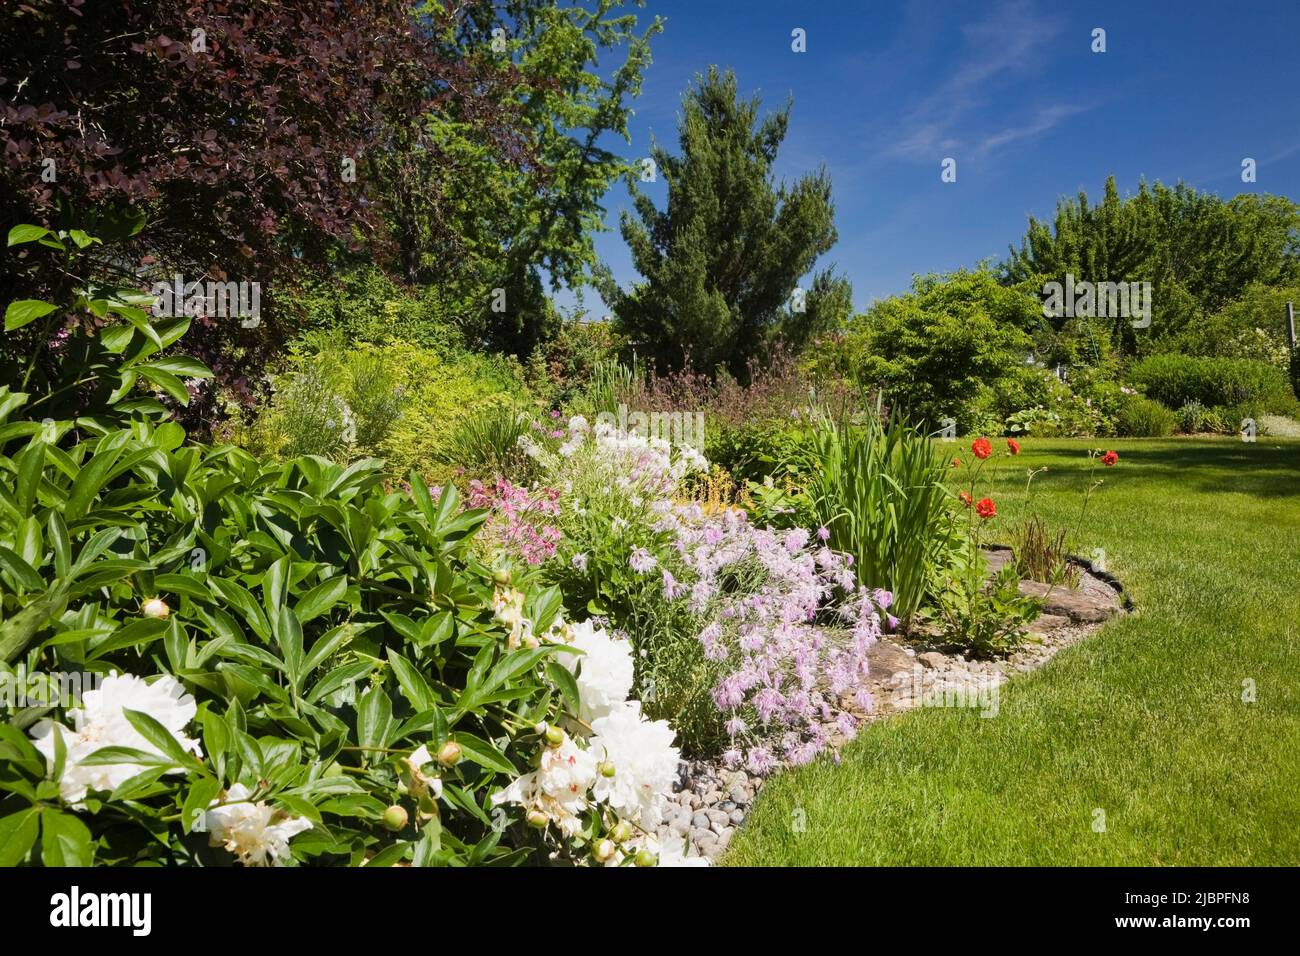 English style border with white Paeonia ‘Festiva Maxima’ - Peonies and mauve Dianthus ‘Rainbow Loveliness’ - Carnations in backyard garden in spring. Stock Photo